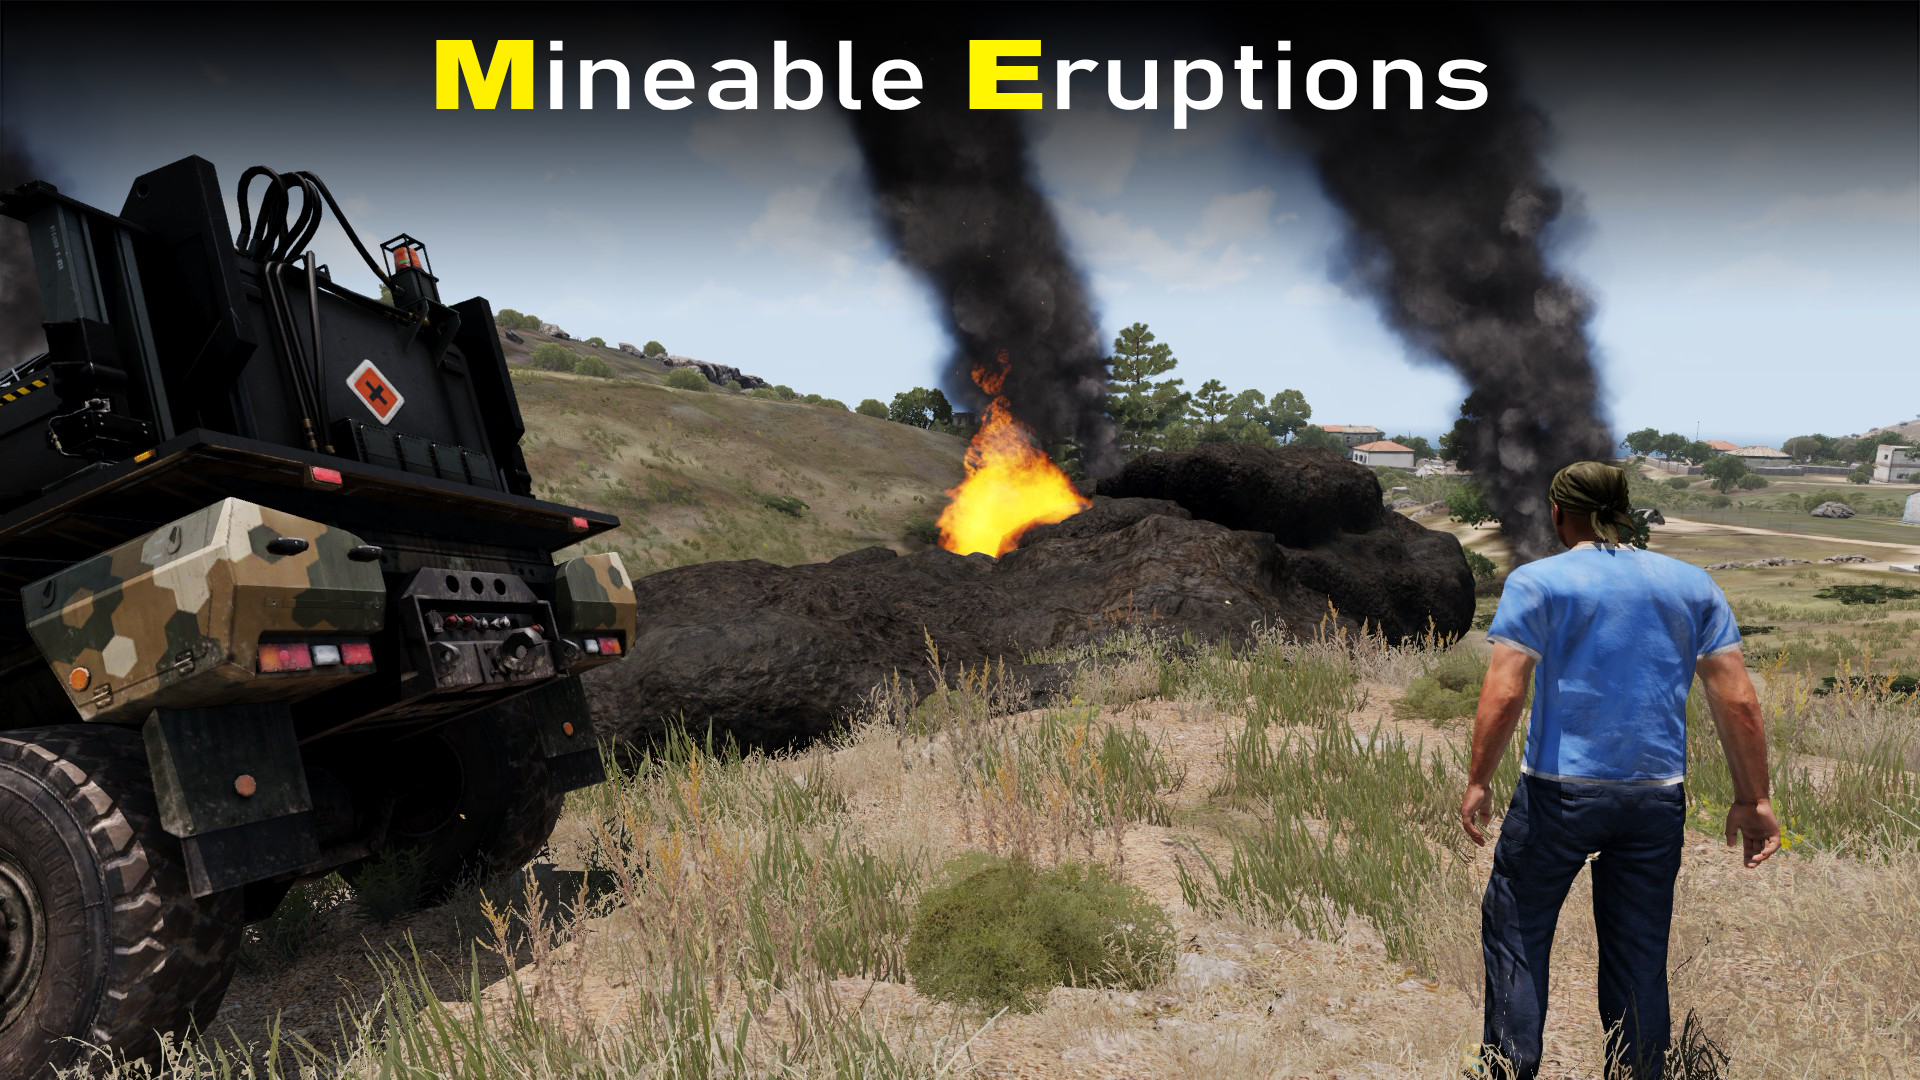 Mineable Eruptions